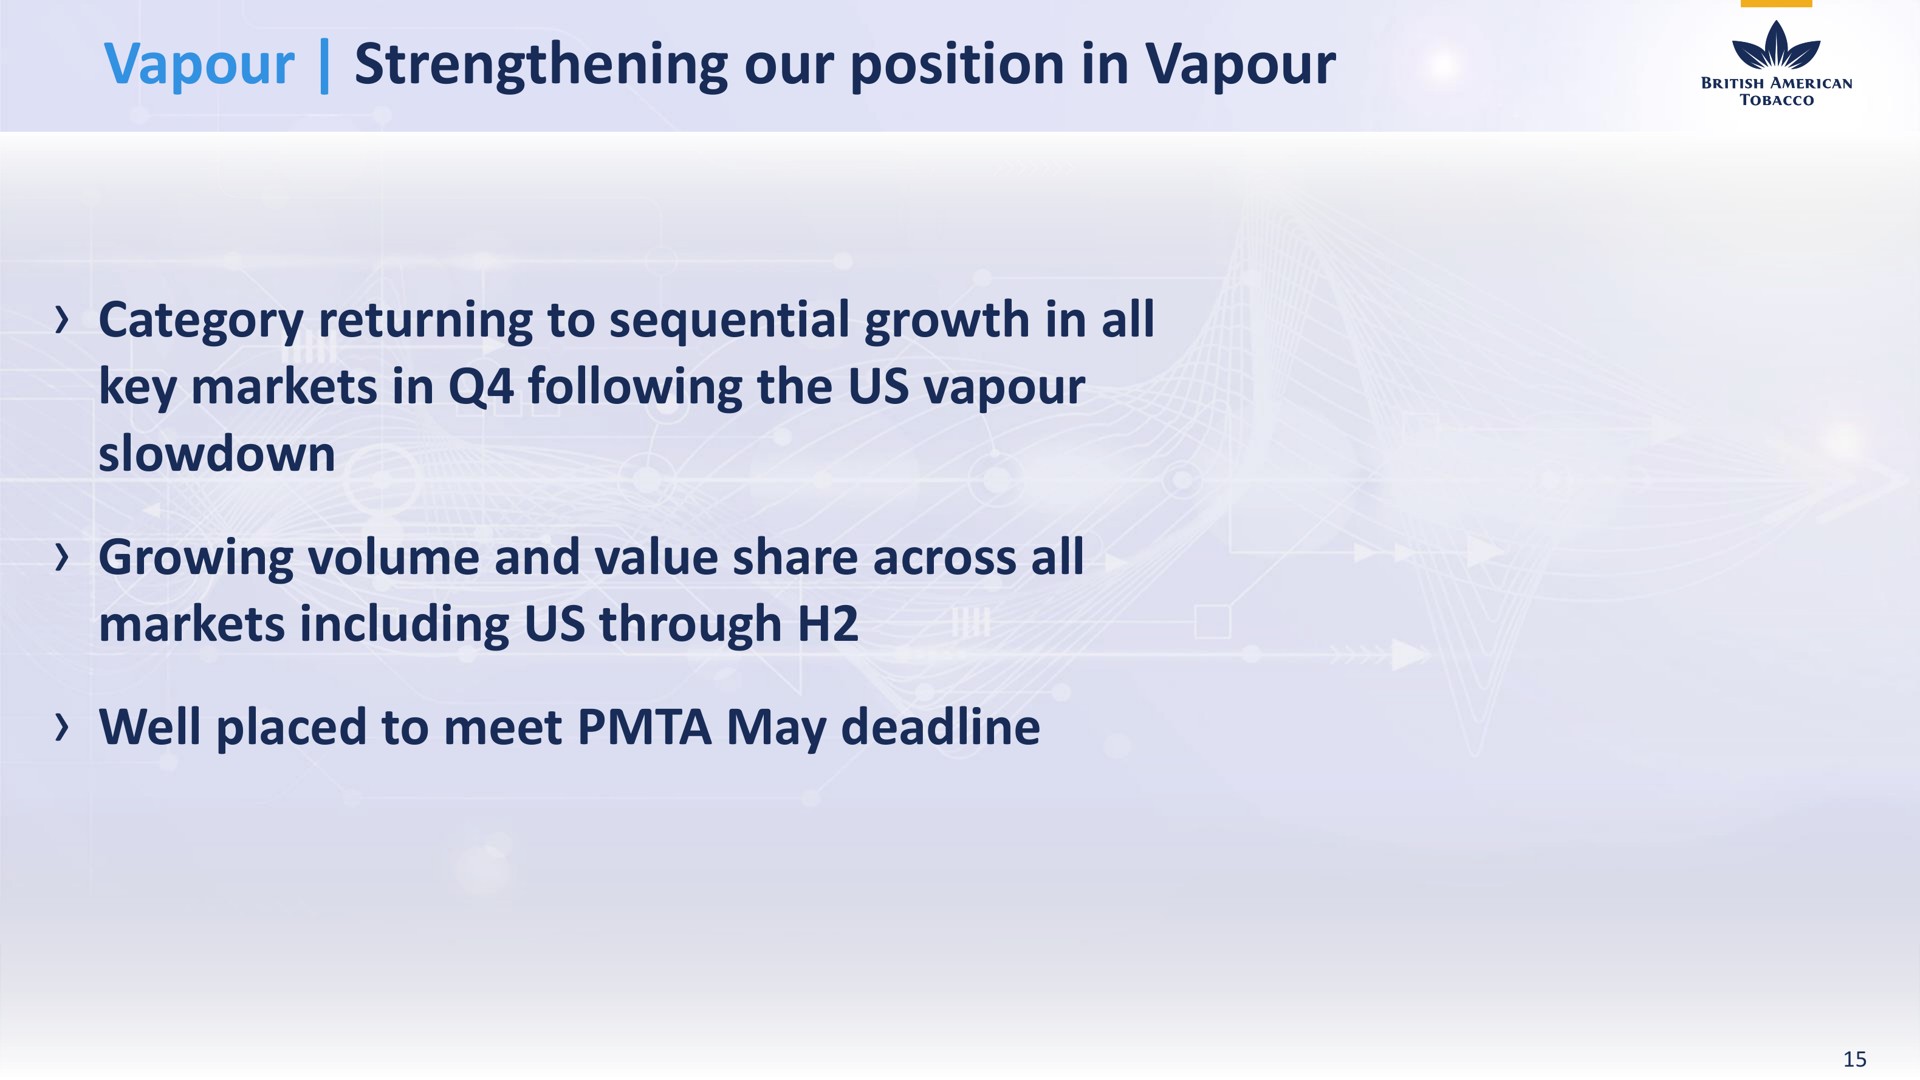 strengthening our position in category returning to sequential growth all key markets following the us slowdown growing volume and value share across all markets including us through well placed to meet may deadline | BAT